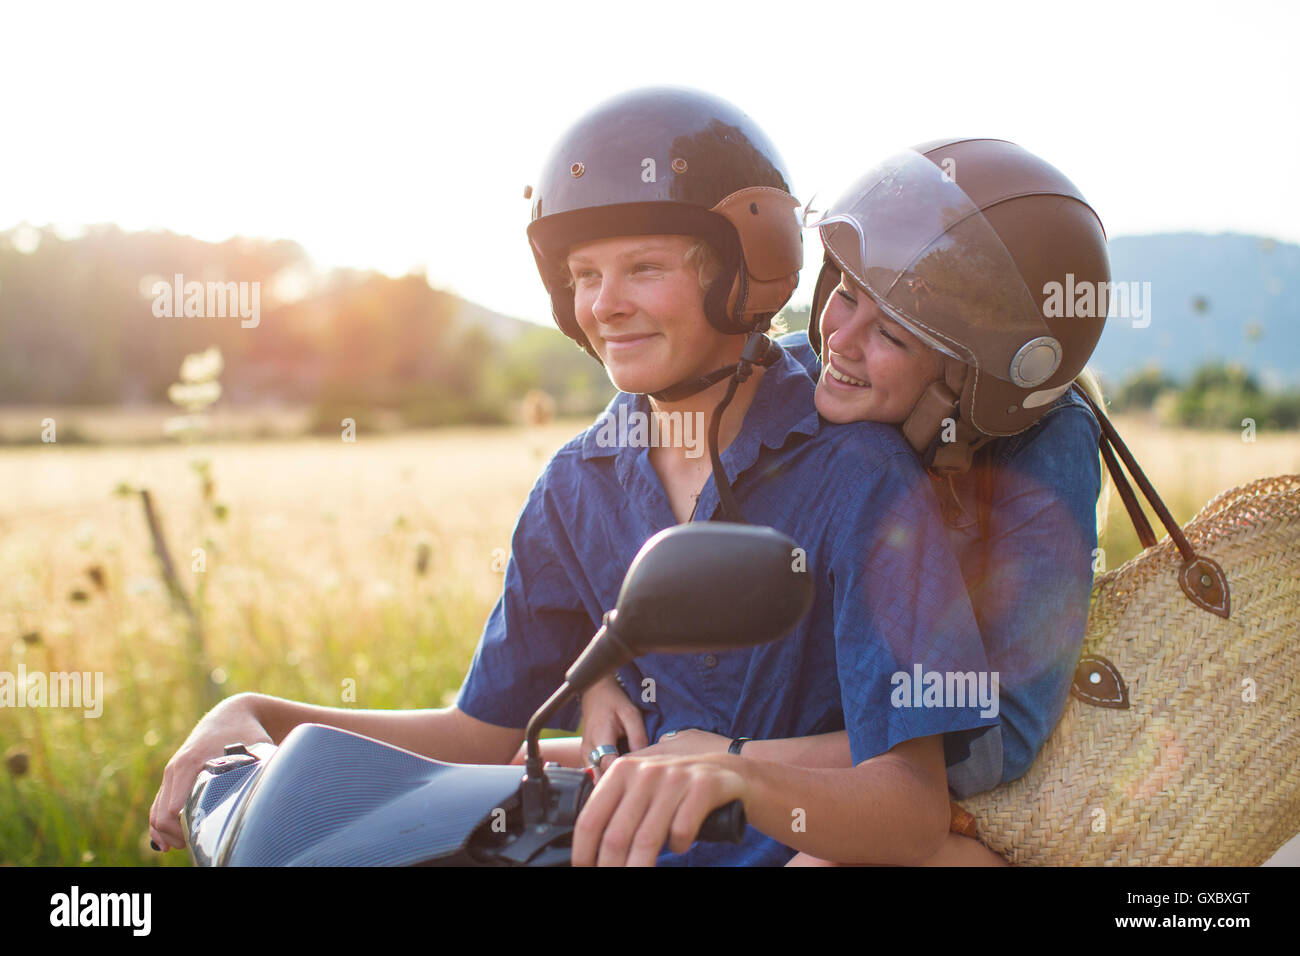 Happy riding moped on rural road, Majorque, Espagne Banque D'Images